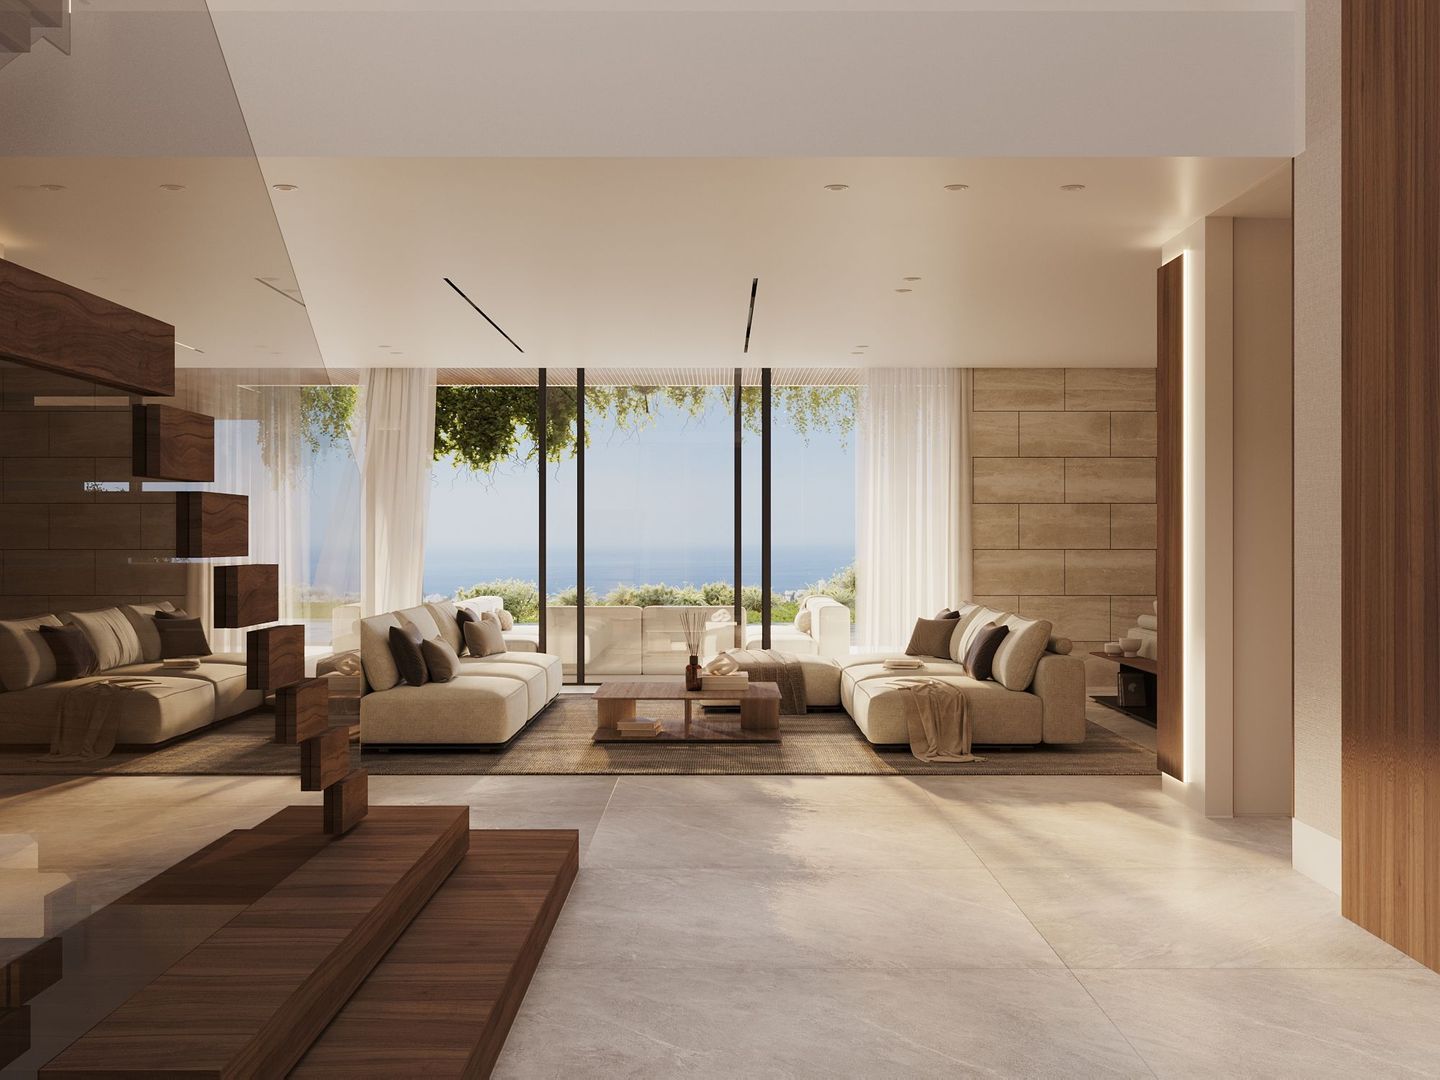 One of the most exciting property launches in Marbella, Benahavis foto-2